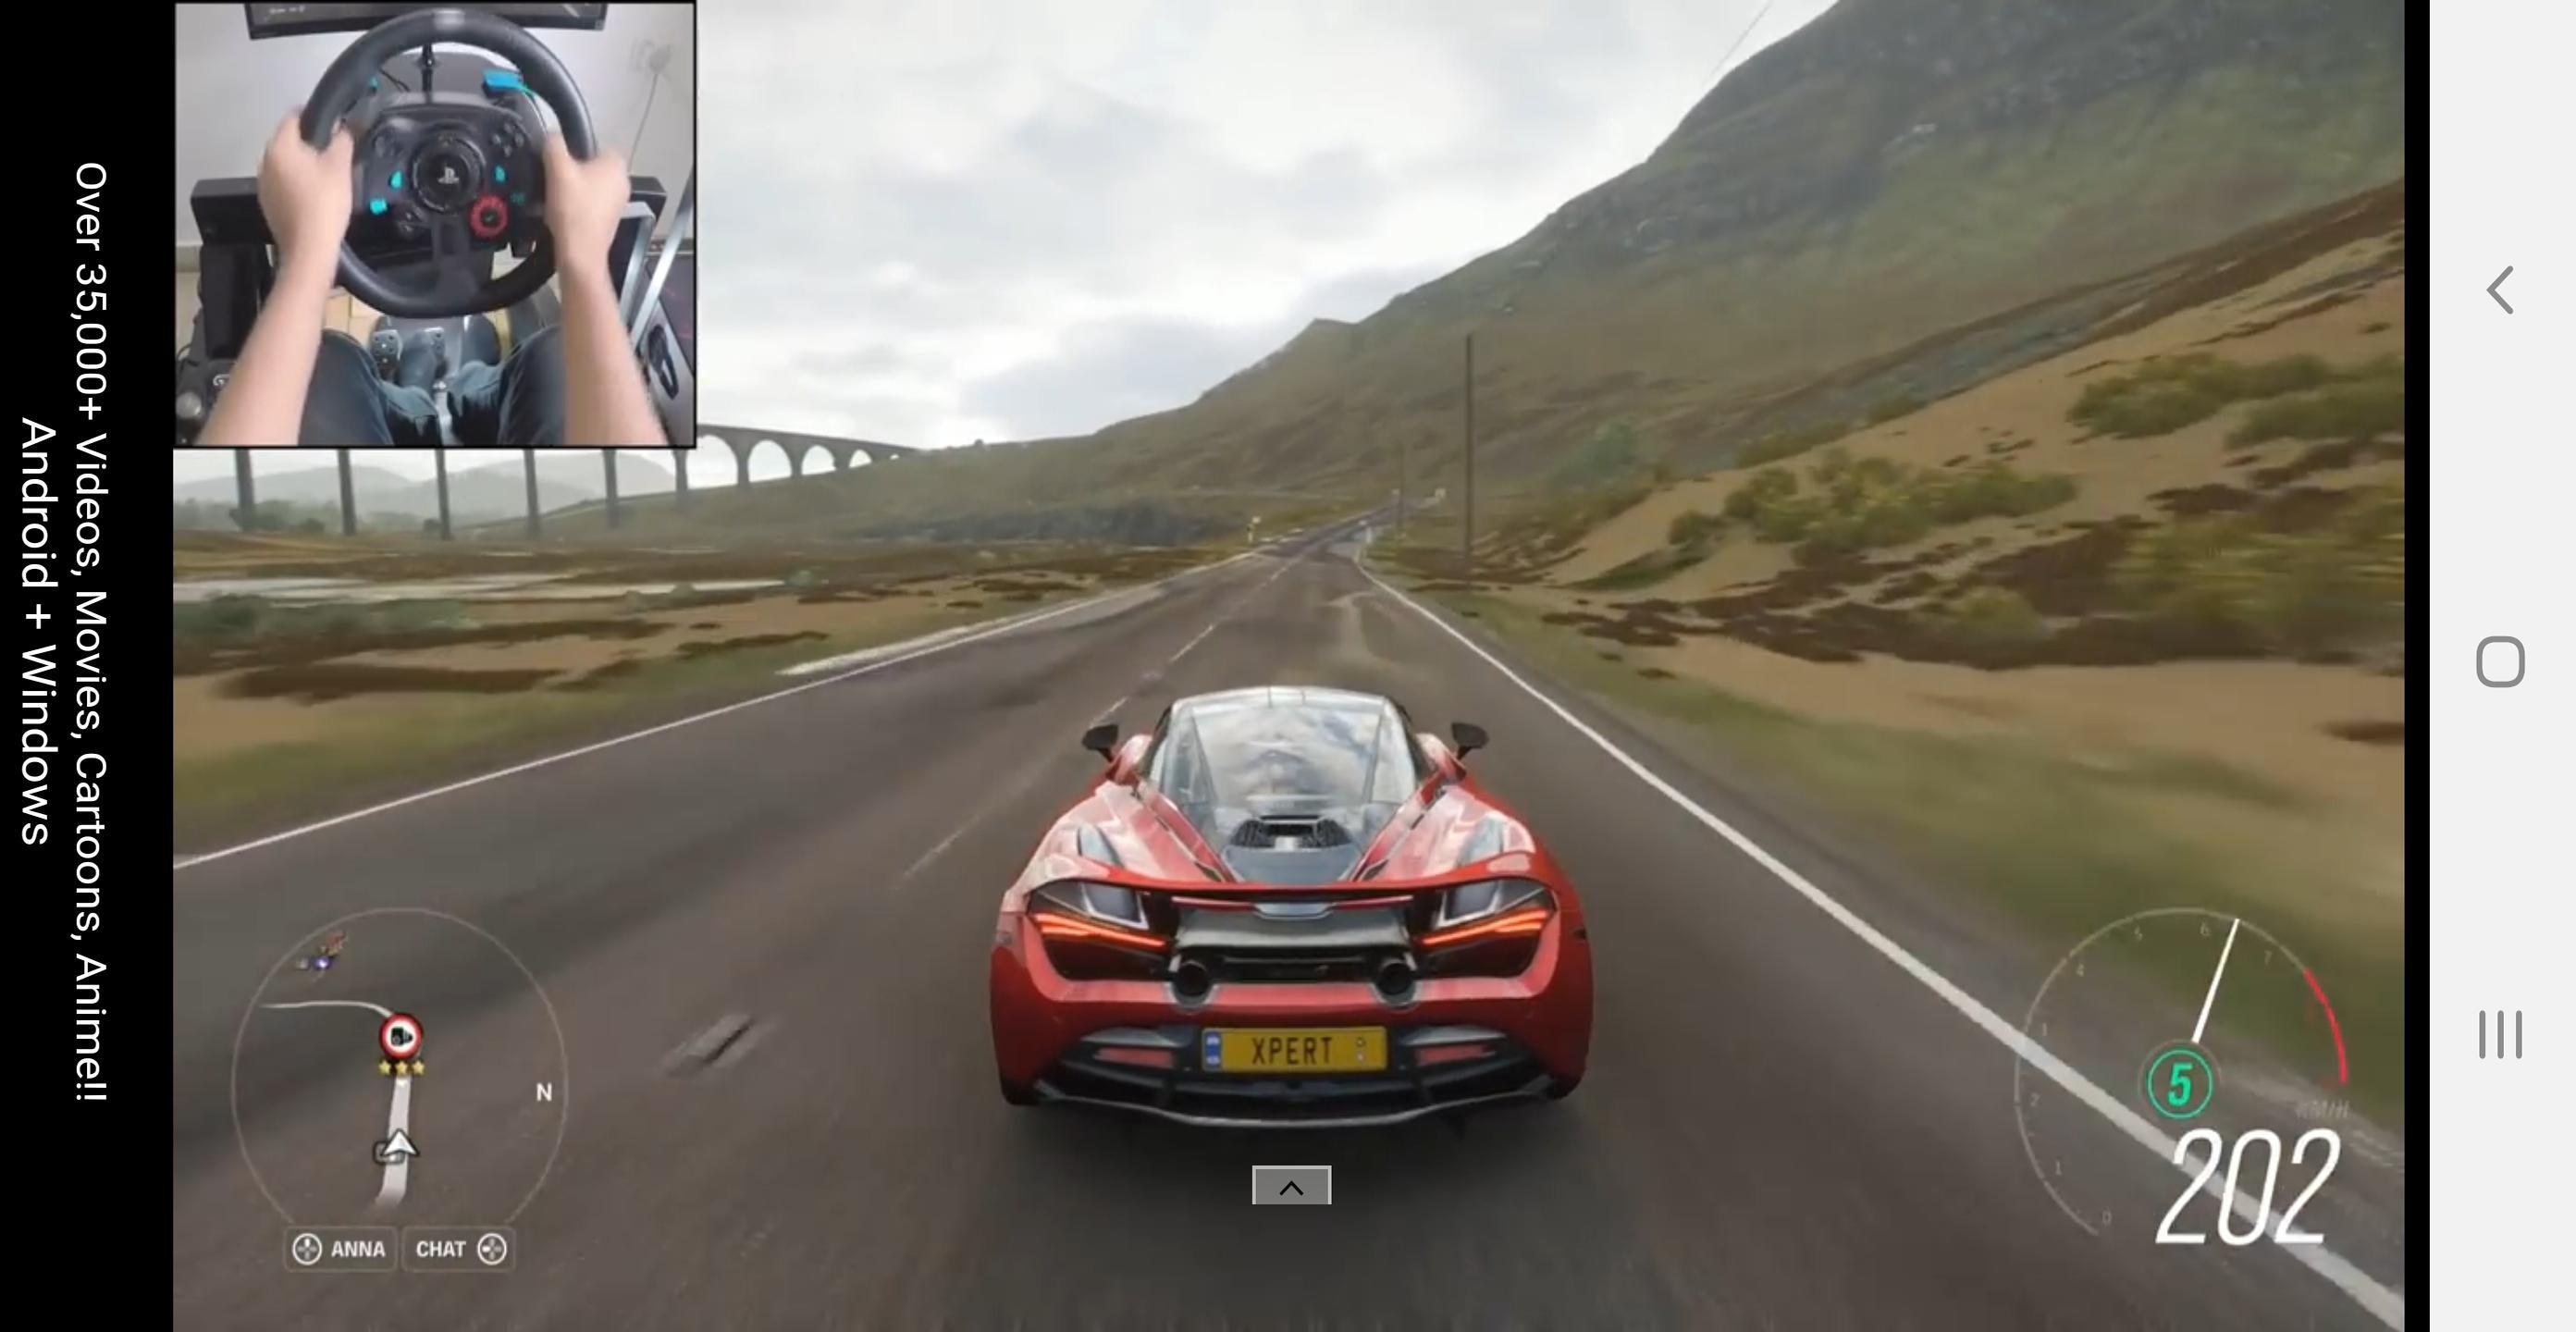 Forza Horizon 4 - Game Videos Guide For Android - APK Download